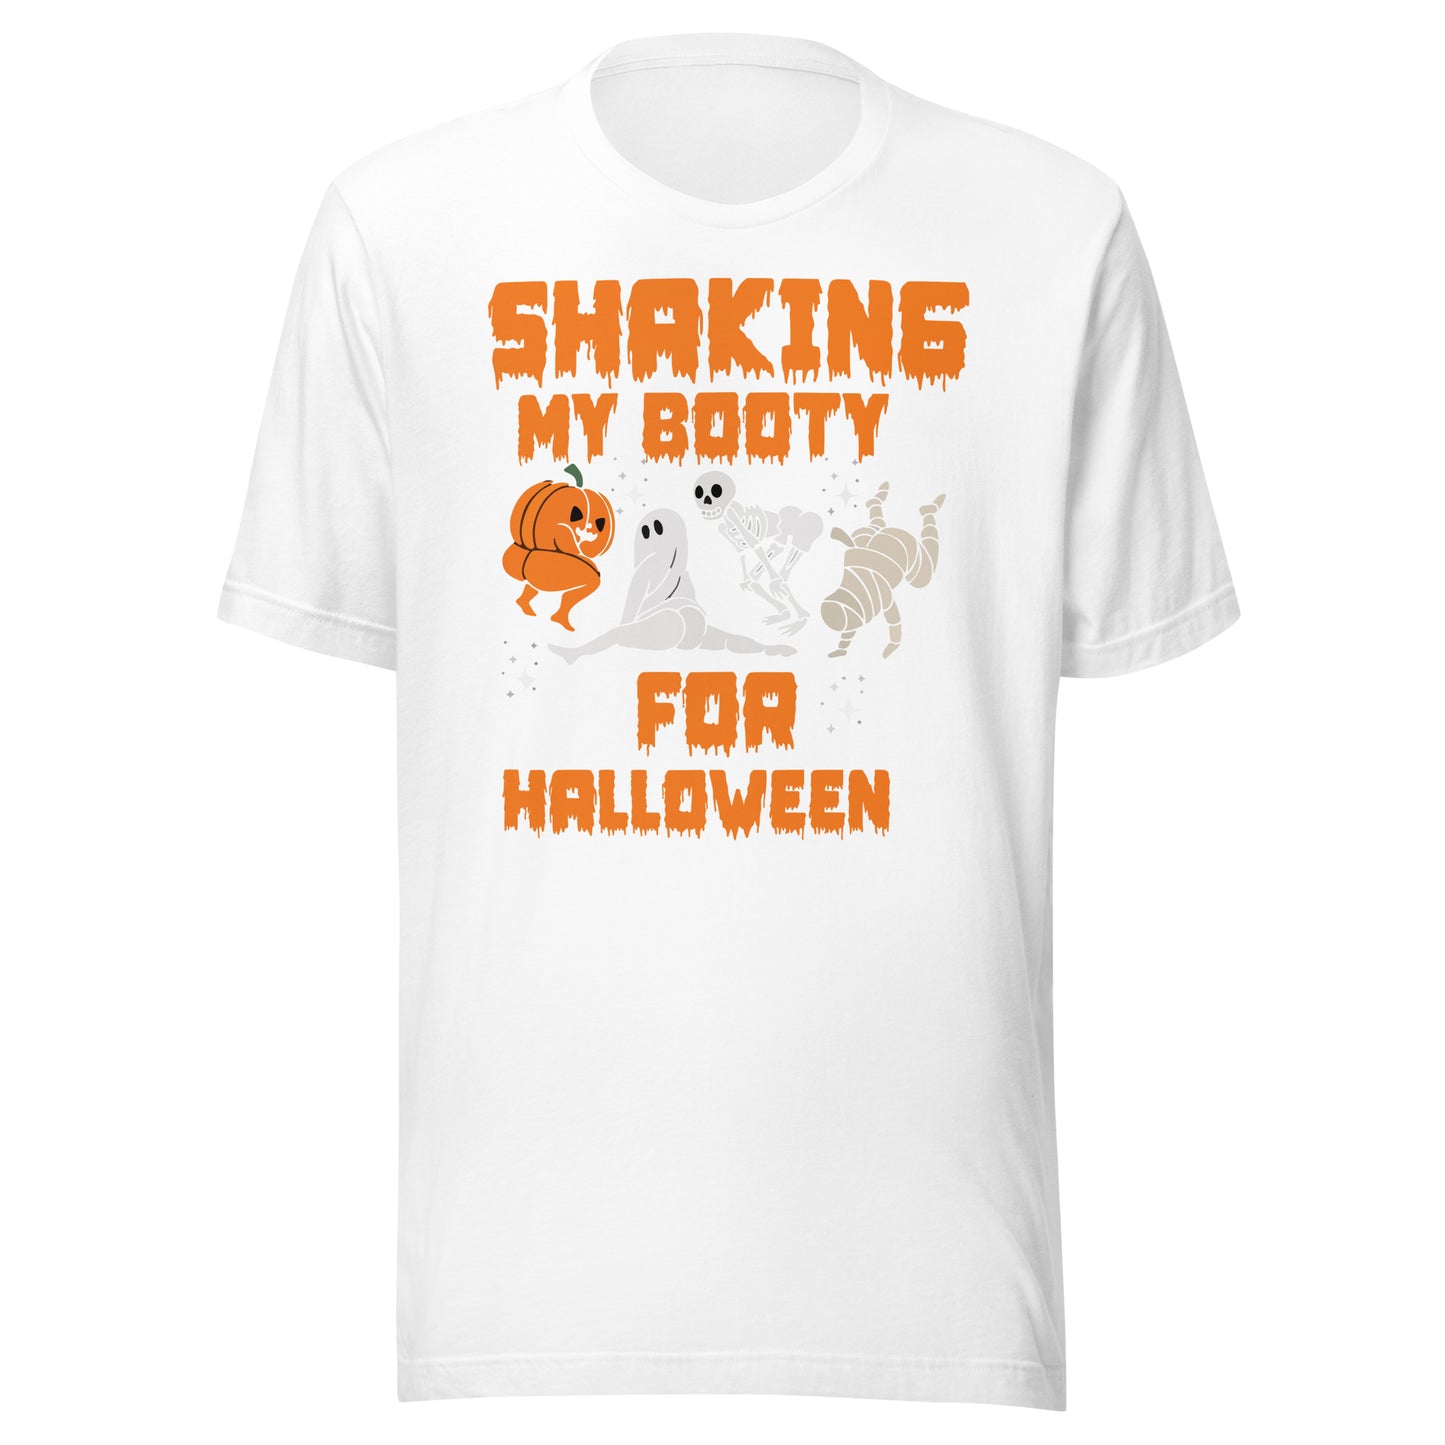 shaking my booty FOR HALLOWEEN Unisex t-shirt